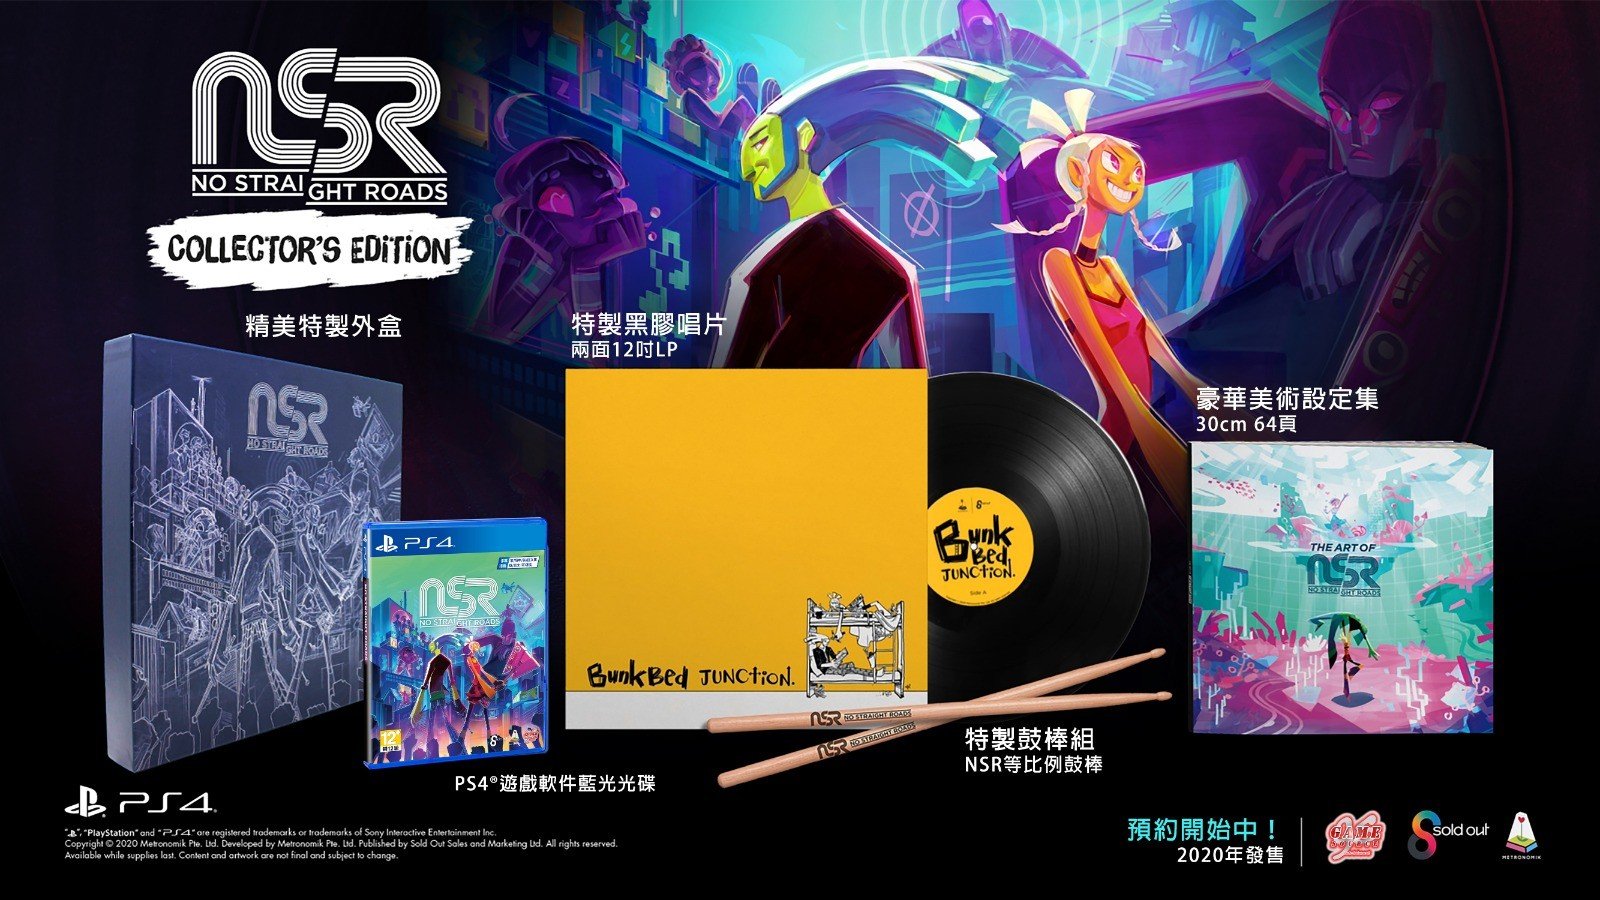 no straight roads, Game Source Entertainment, ps4, playstation 4, Asia, Japan, release date, gameplay, features, price, pre-order, multi-language, collector's edition, limited edition